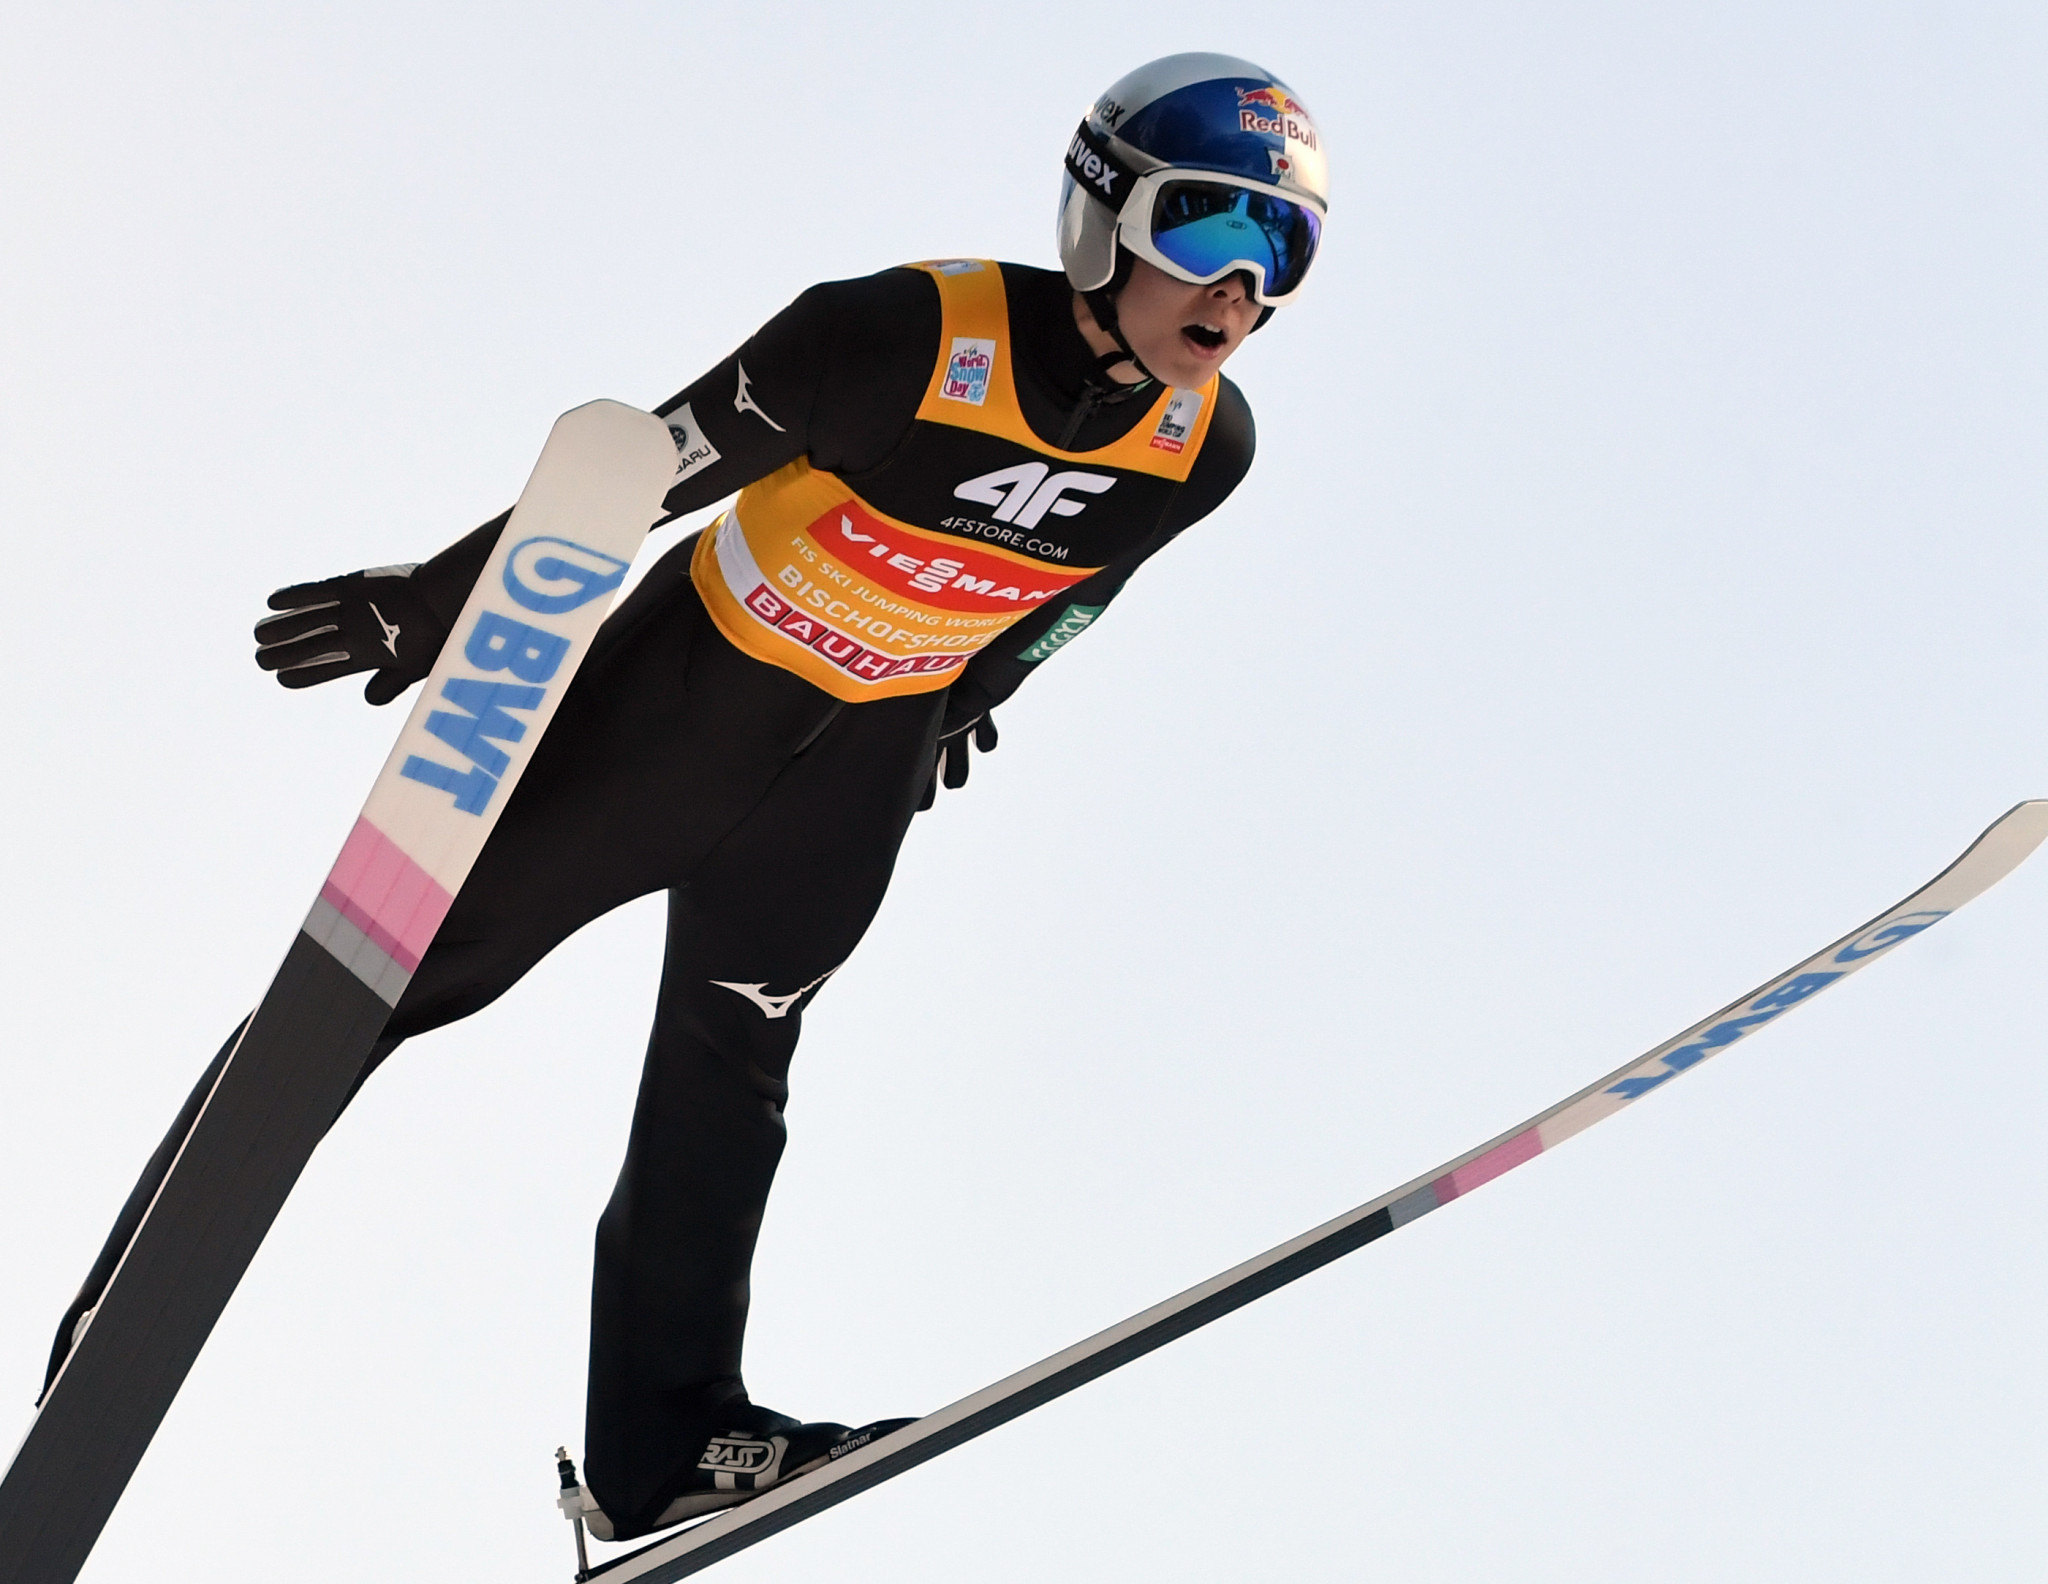 Val di Fiemme braced to host FIS Ski Jumping World Cup